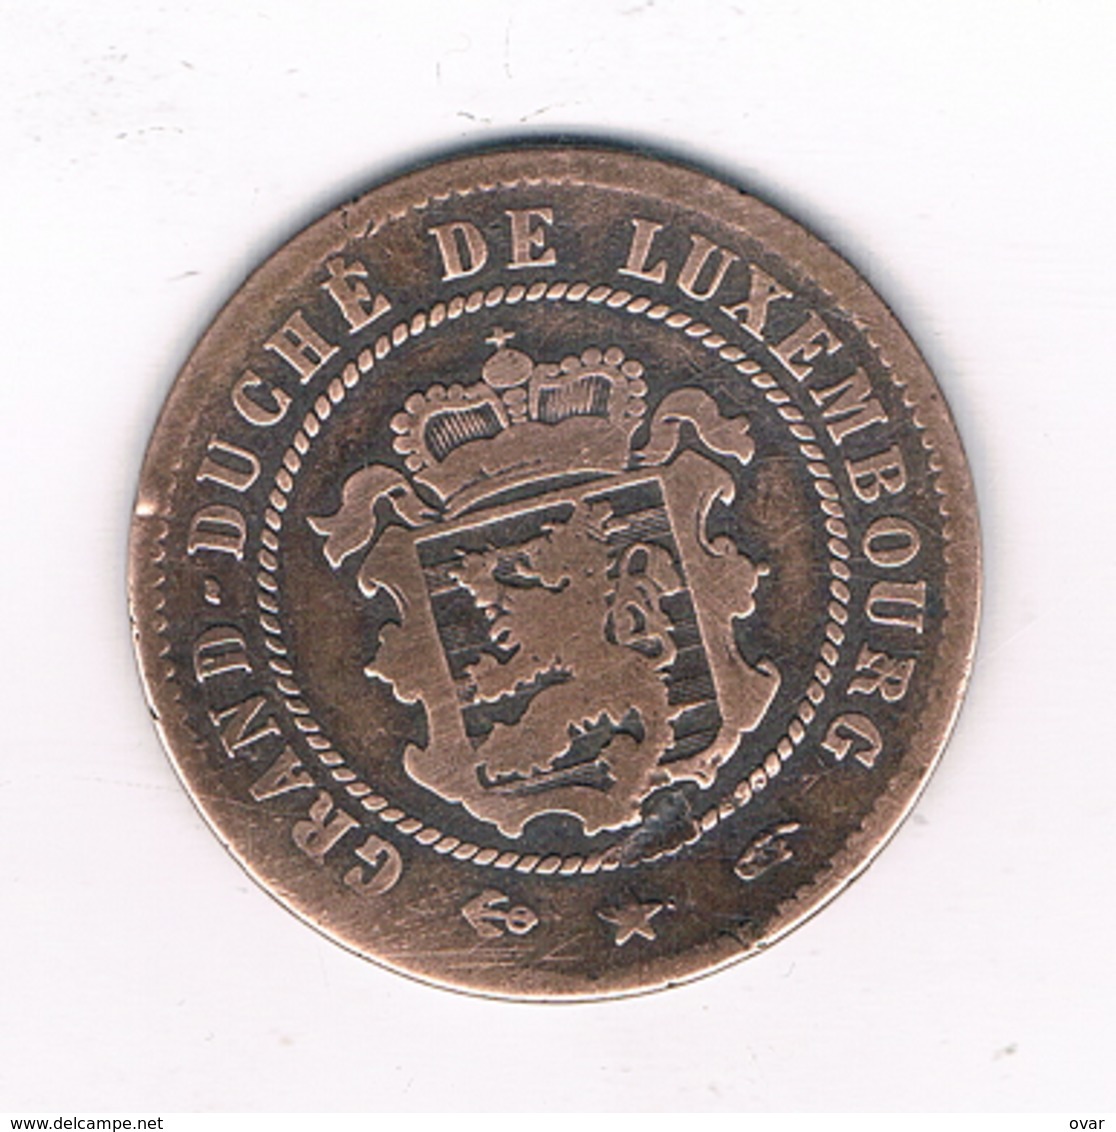 5 CENTIMES 1855 A (mintage 600000ex)LUXEMBURG /6082/ - Luxembourg